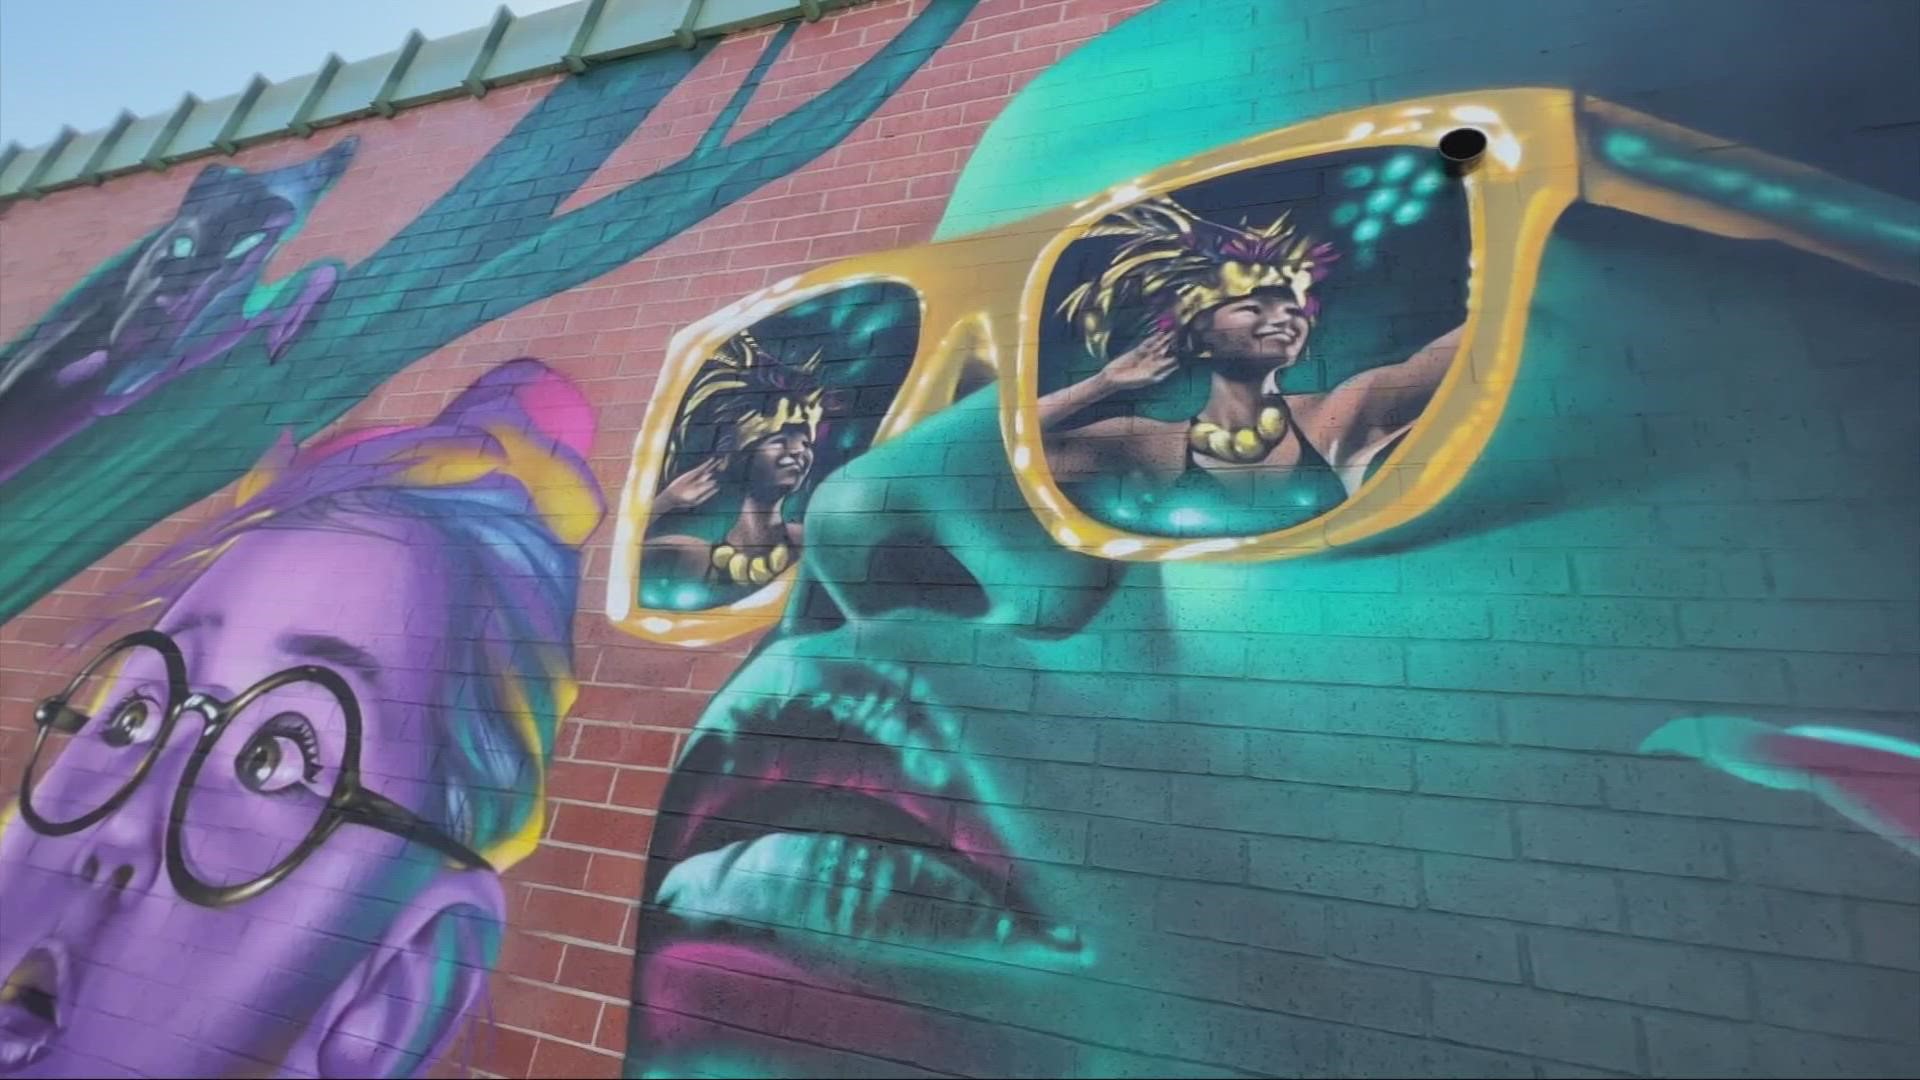 For the project, 39 artists collaborated to help create 10 murals in eight districts throughout Sacramento.